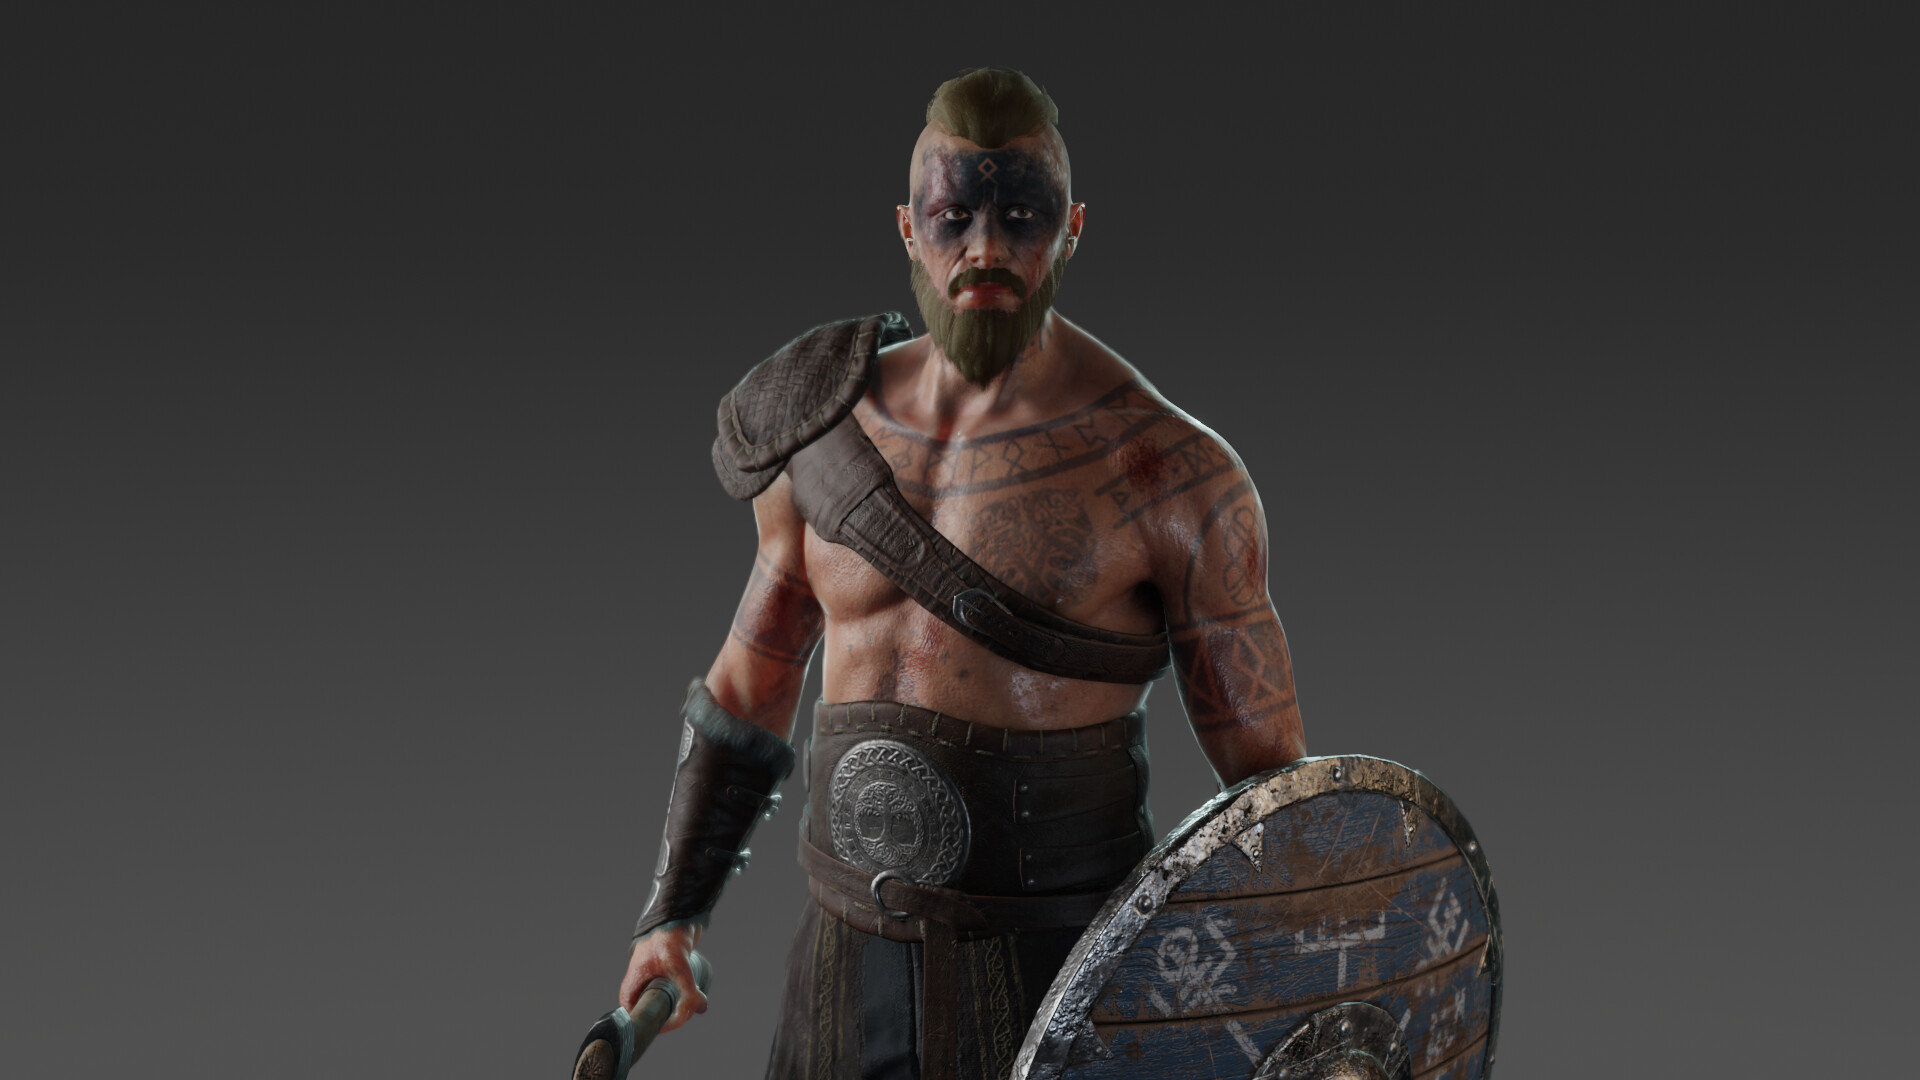 ArtStation - Norse warrior - Real-time